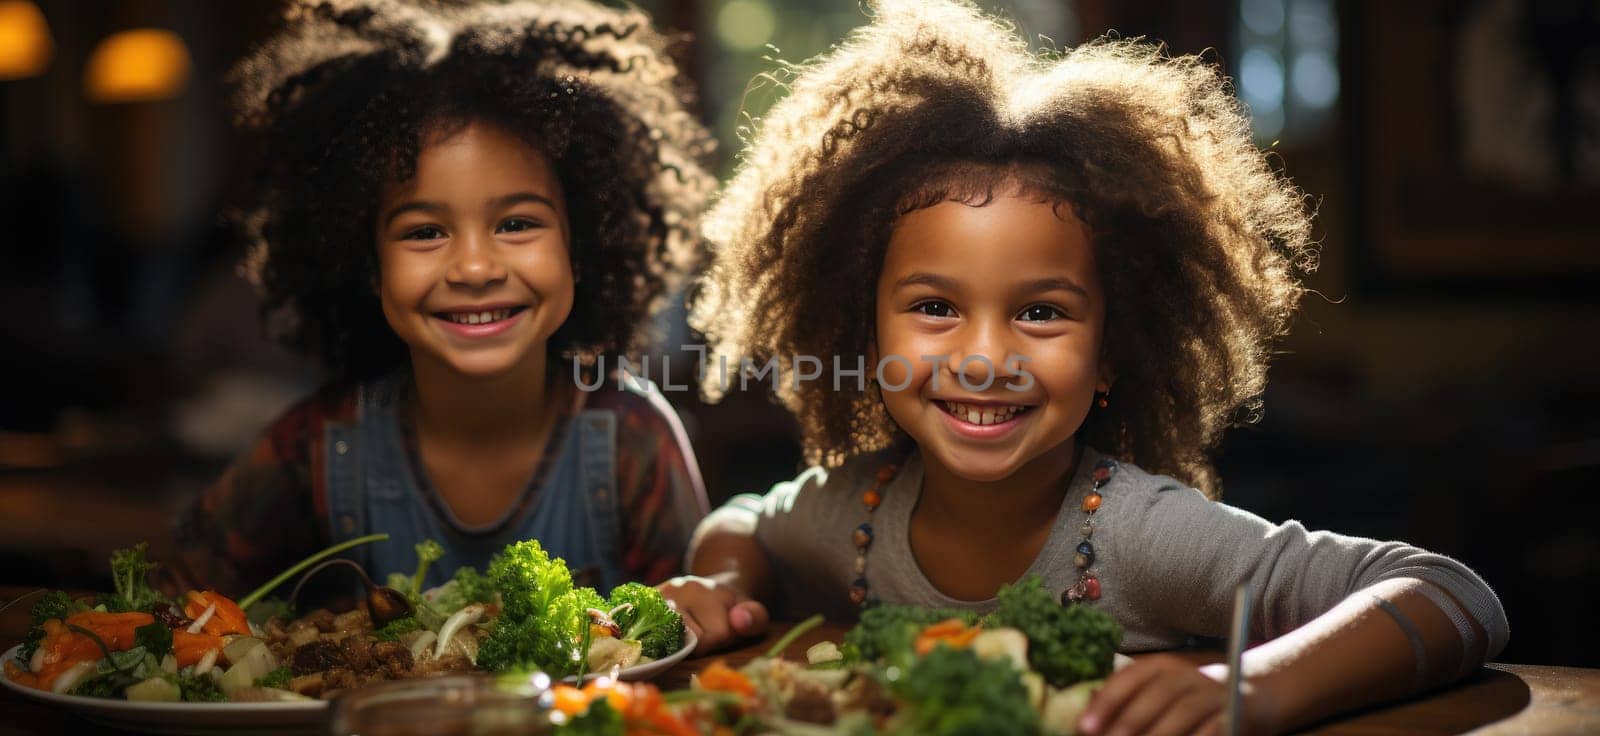 Smiling kids enjoying healthy eating at table by Yurich32